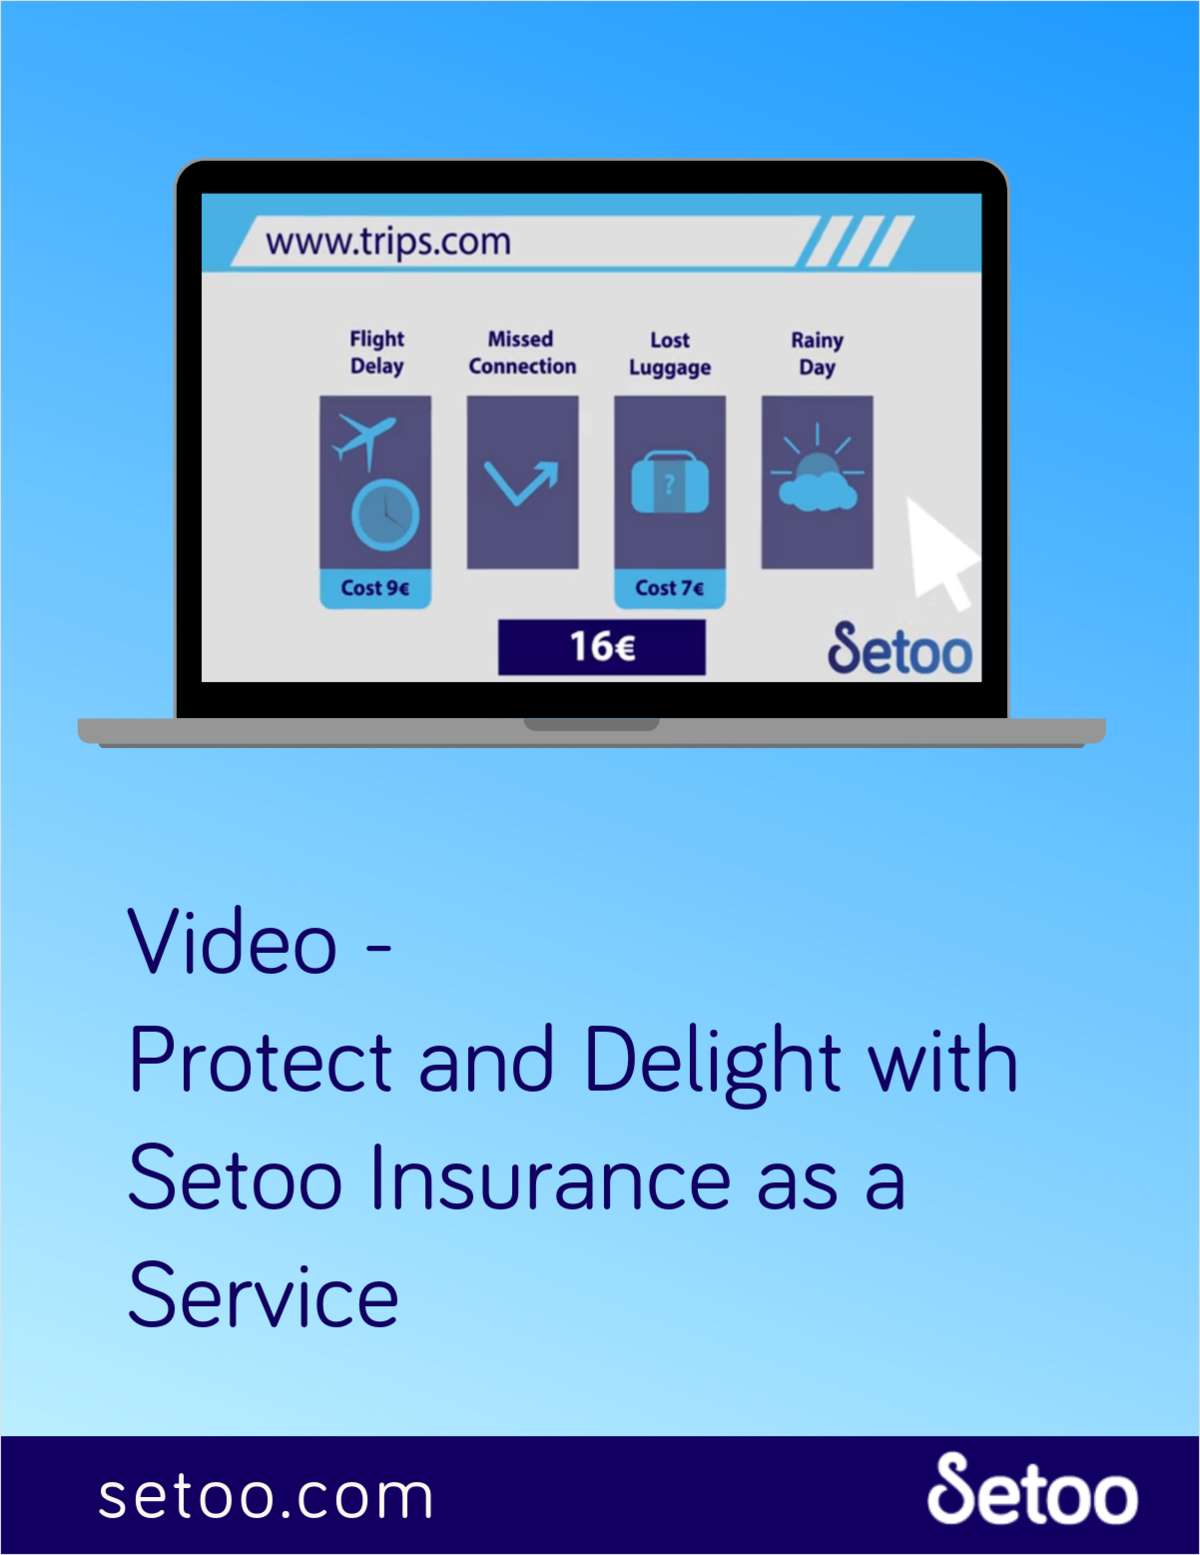 Protect and Delight with Setoo Insurance as a Service